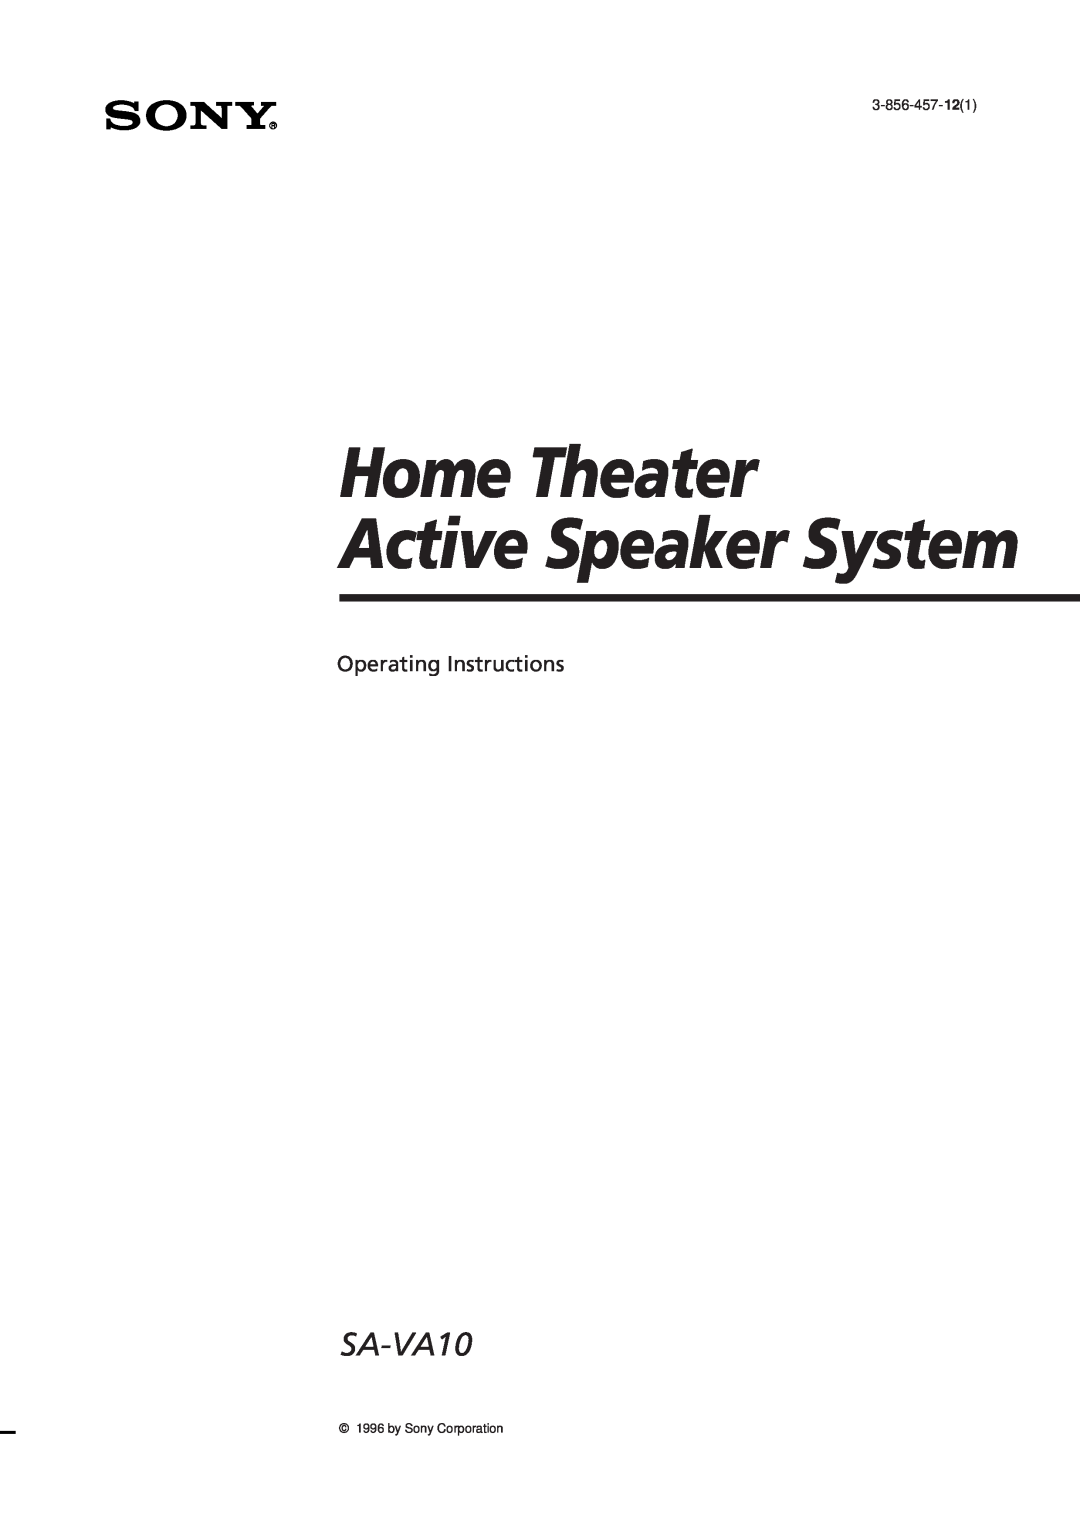 Sony SA-VA10 manual Home Theater, Active Speaker System, Operating Instructions, 3-856-457-121, by Sony Corporation 